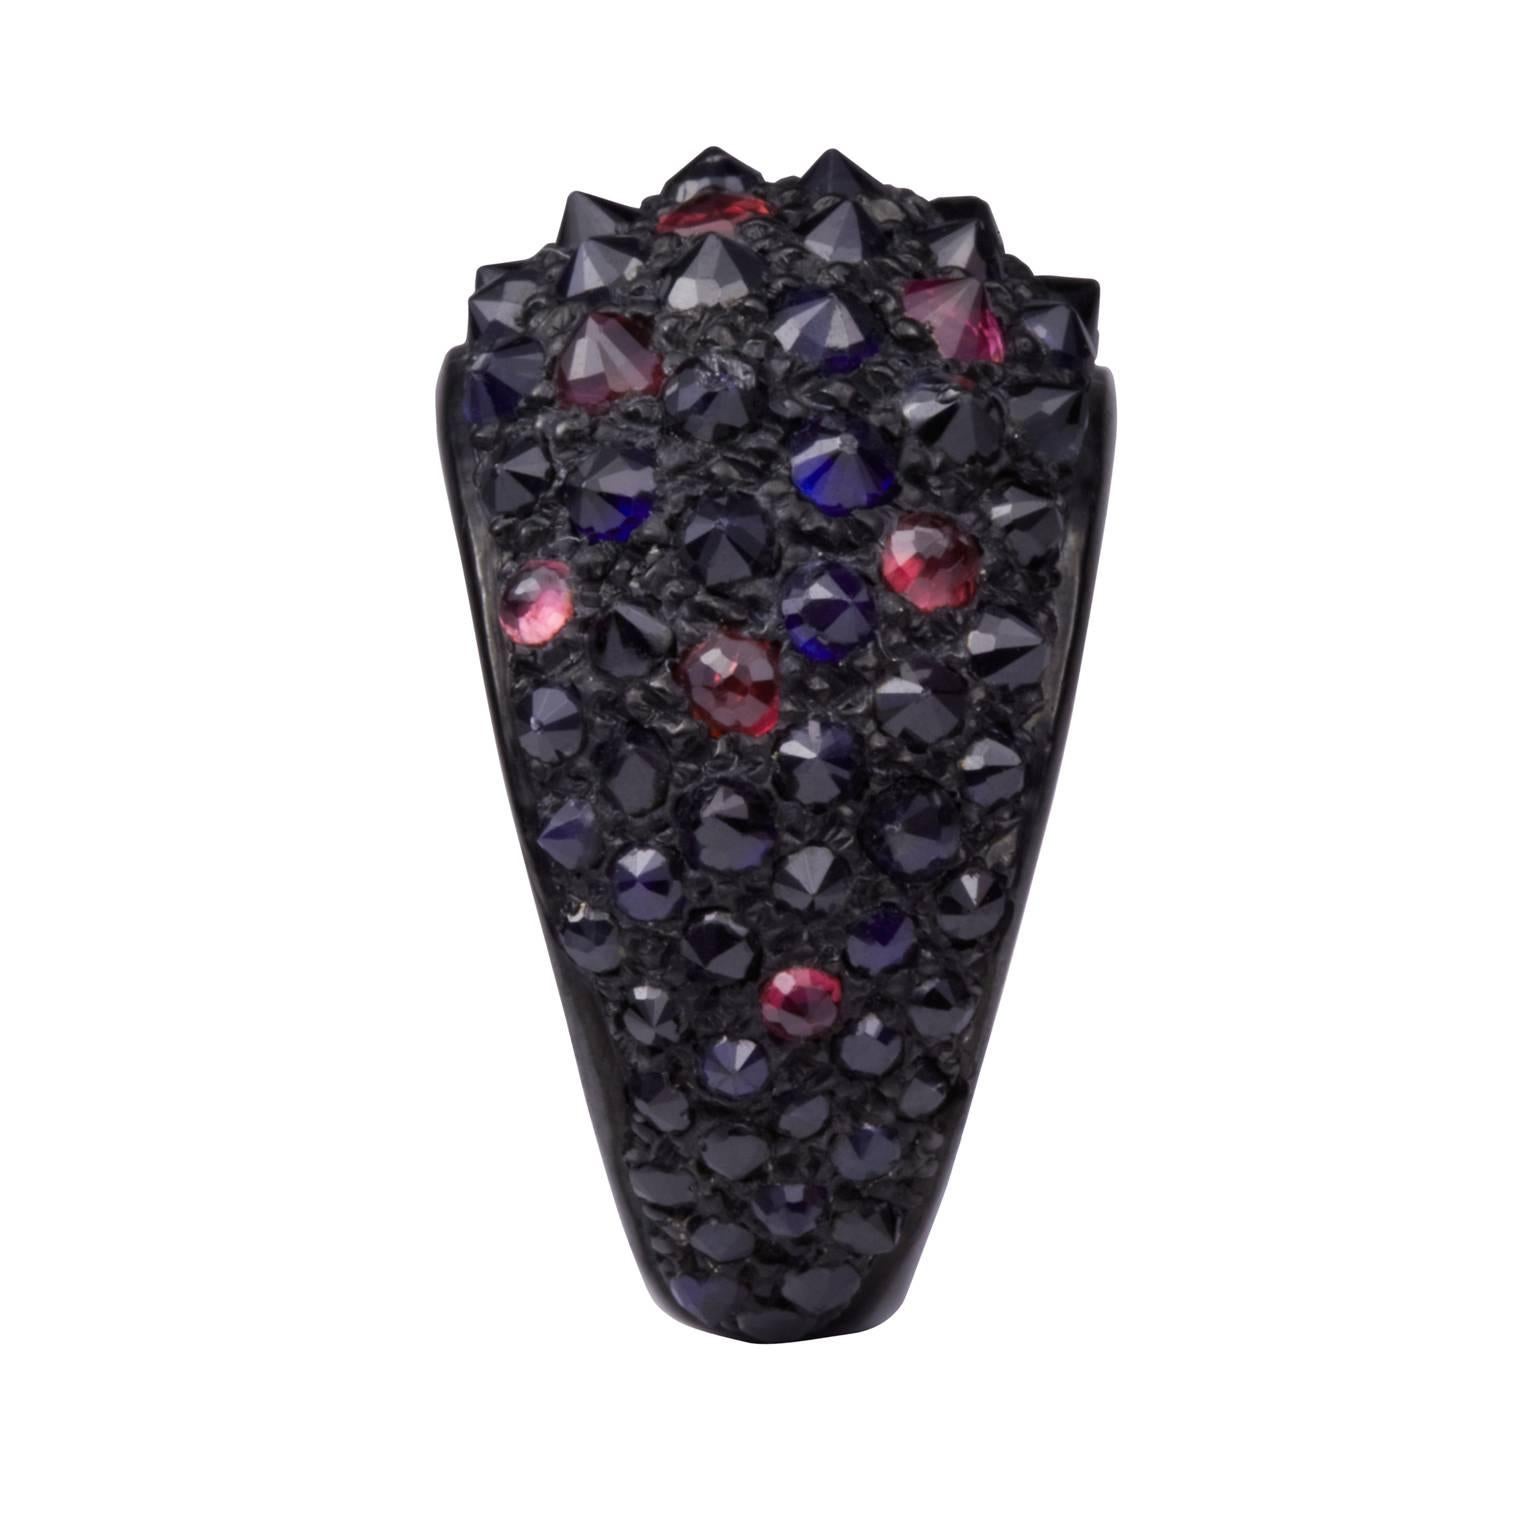 From Hannah’s iconic inaugural collection entitled ‘It’s Only Rock N’ Roll’, this ring is a stand out collector’s piece. Sapphires and rubies are set into 18 kt gold, their colours enhanced by the black rhodium that surrounds them.

Turning